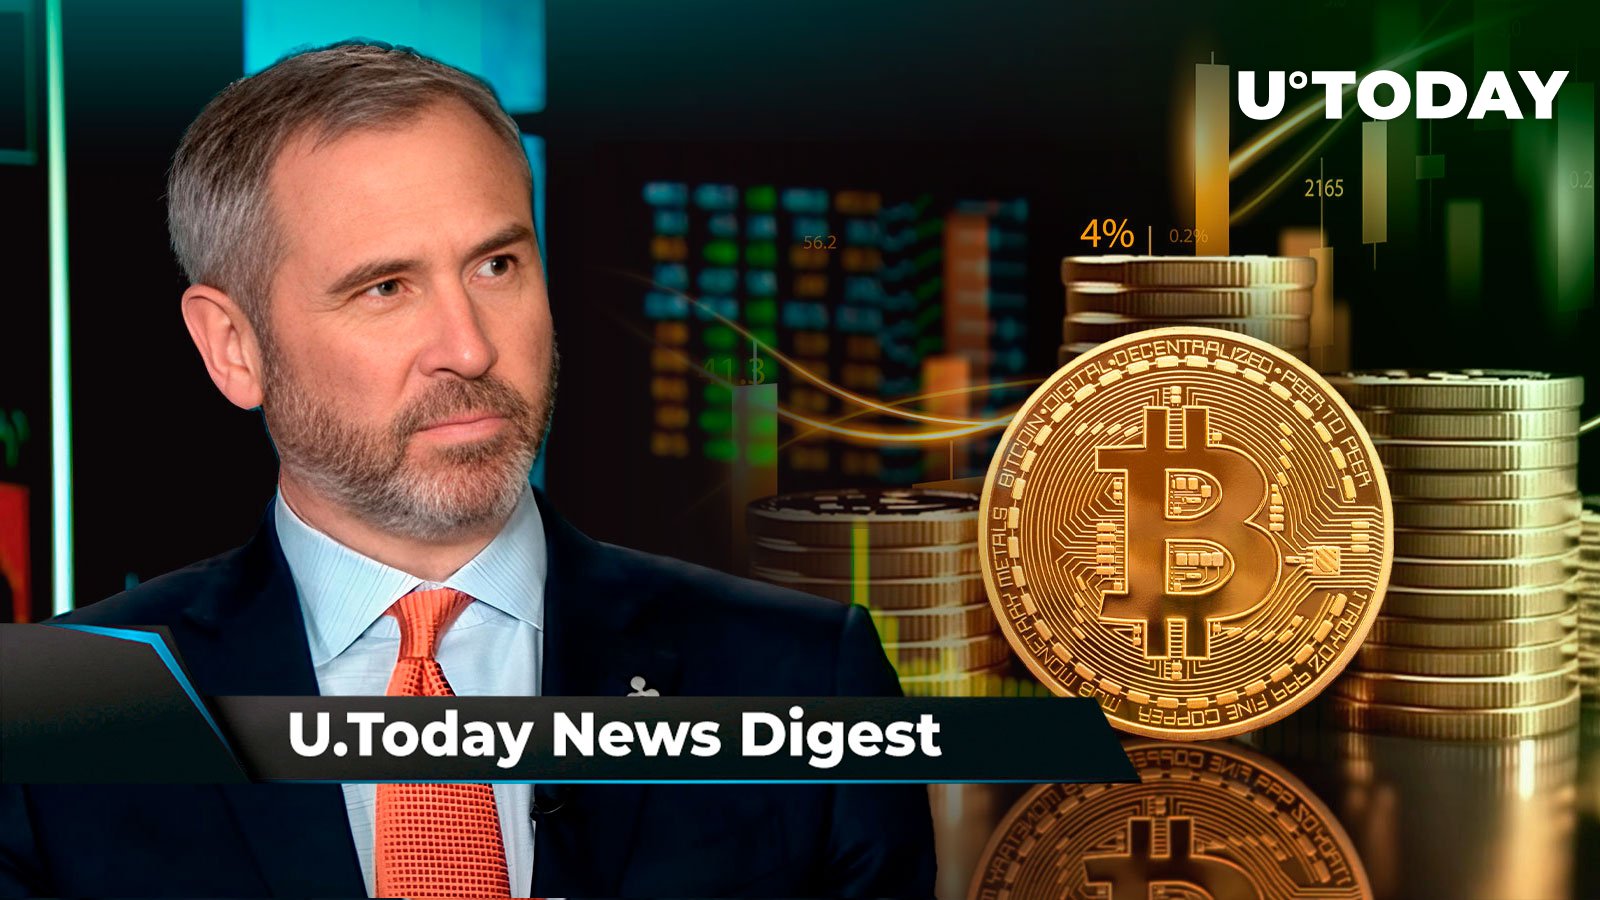 Ripple CEO Makes Stunning Market Prediction, Here’s Why April 10 Is Crucial Date for Crypto and BTC Markets, SHIB Burns Surge Drastically: Crypto News Digest by U.Today